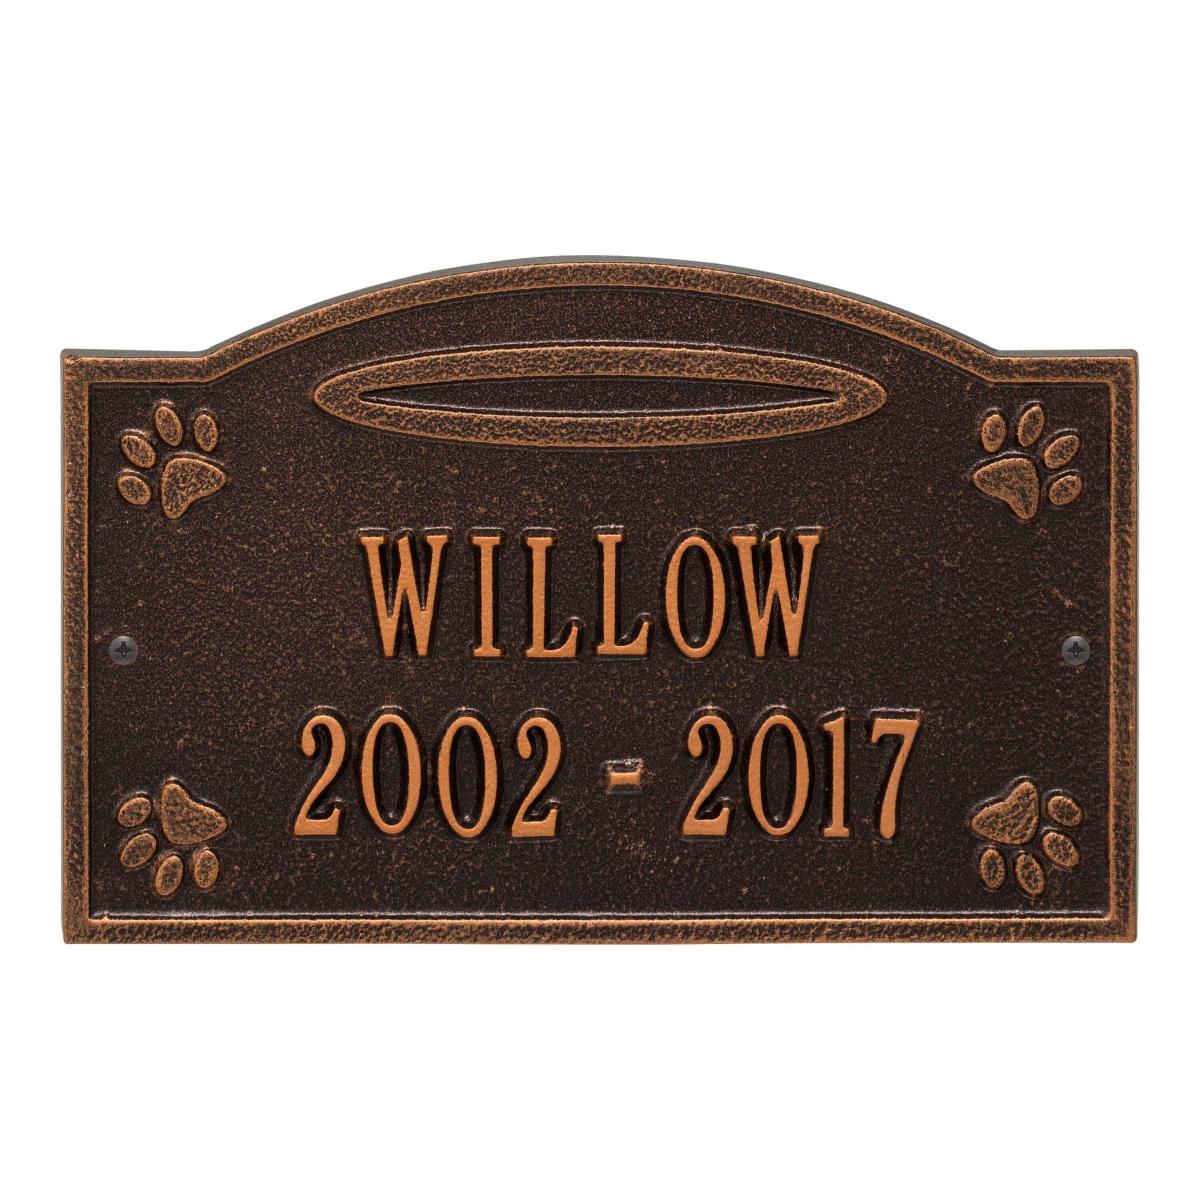 Ground antique cooper plaque finish with image of pet paws and dates